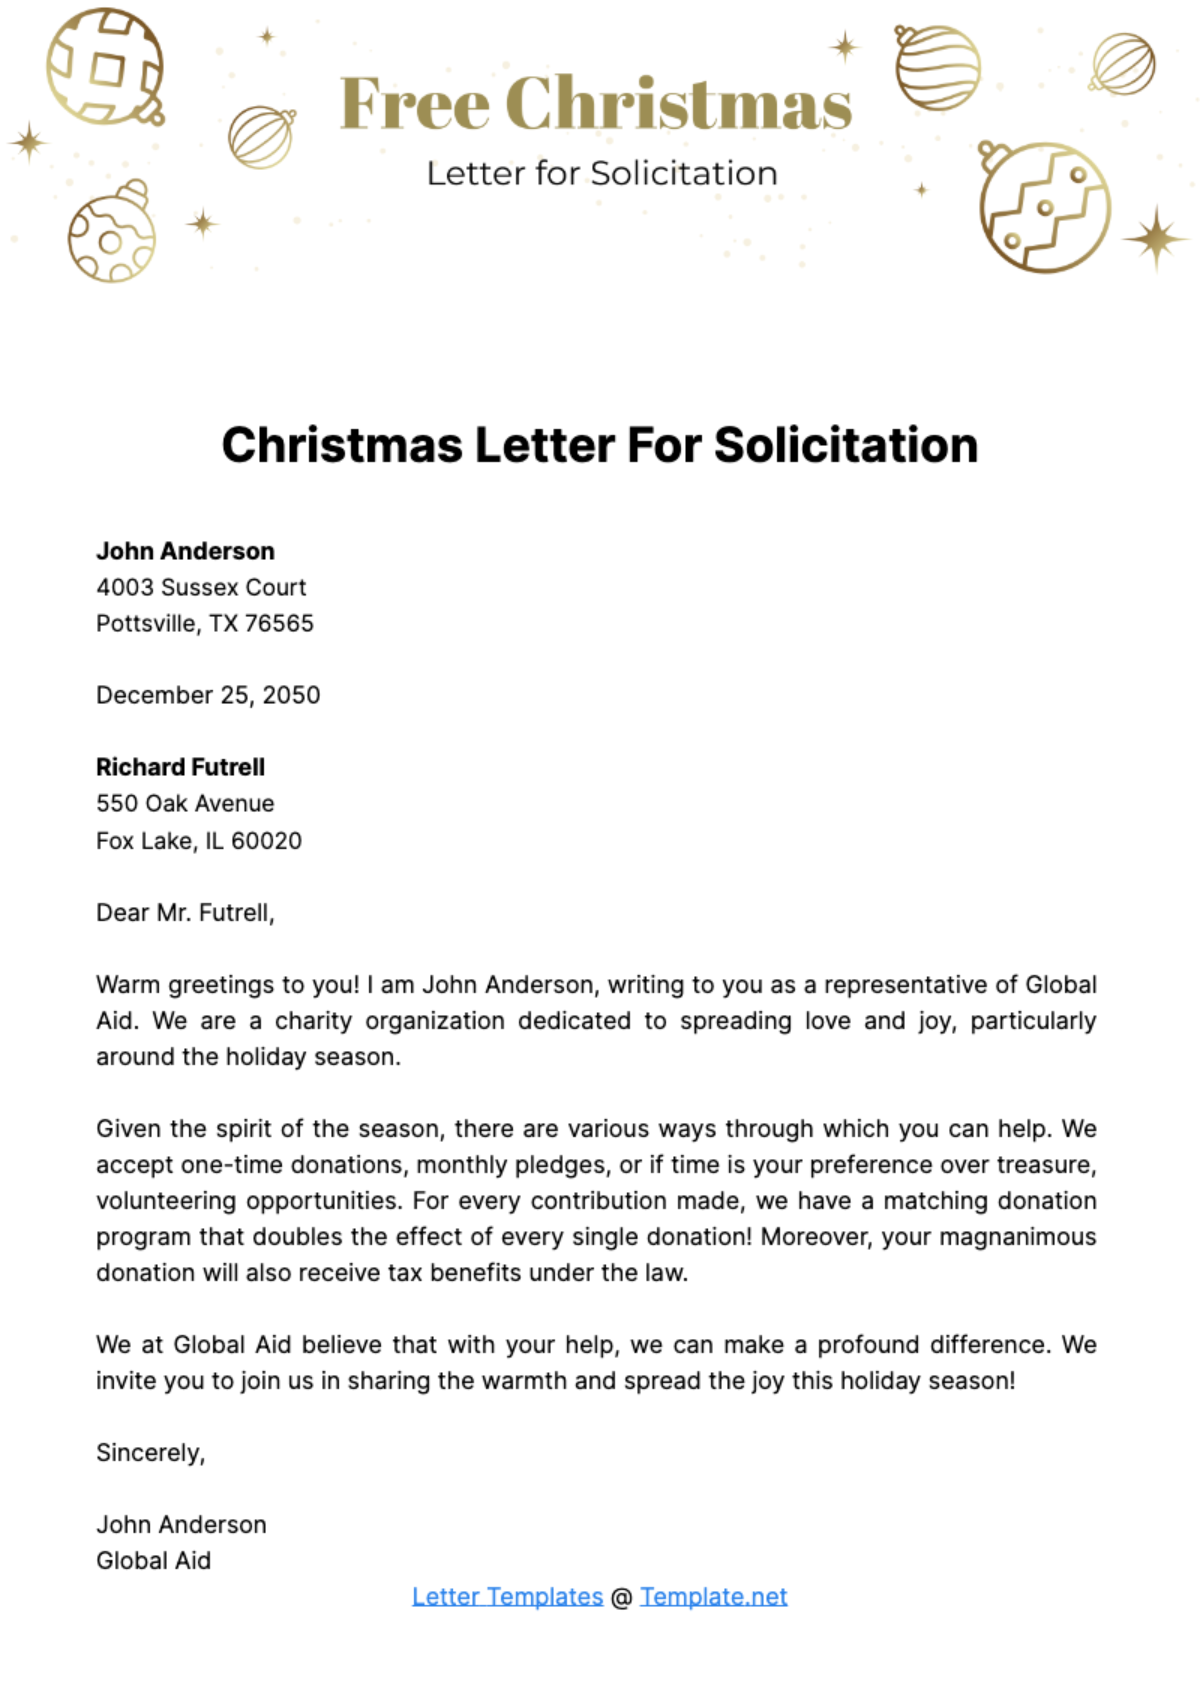 Free Christmas Letter for Solicitation Template